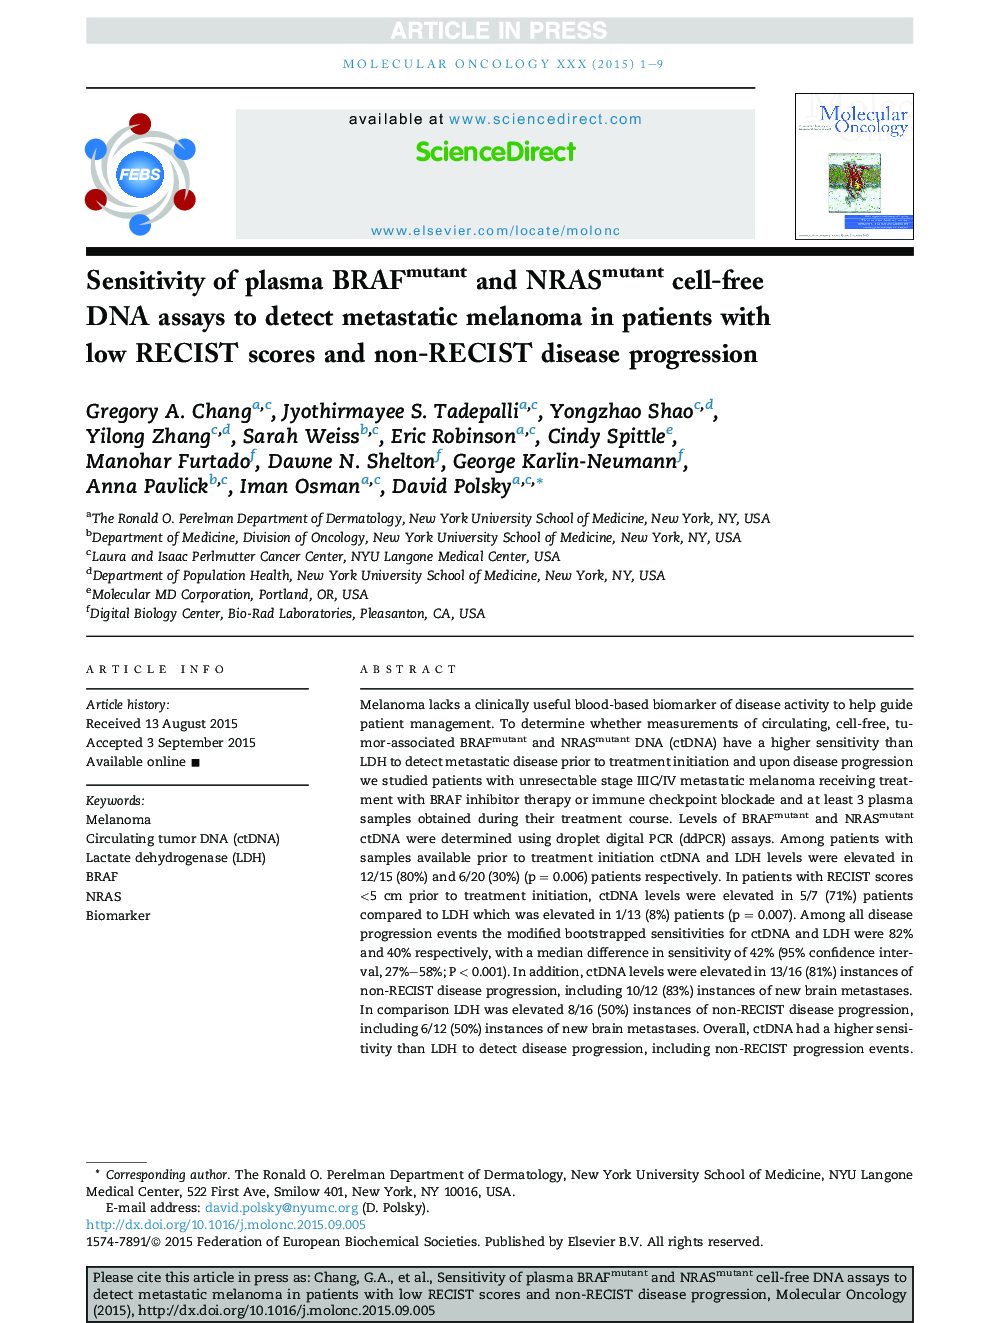 Sensitivity of plasma BRAFmutant and NRASmutant cell-free DNA assays to detect metastatic melanoma in patients with low RECIST scores and non-RECIST disease progression